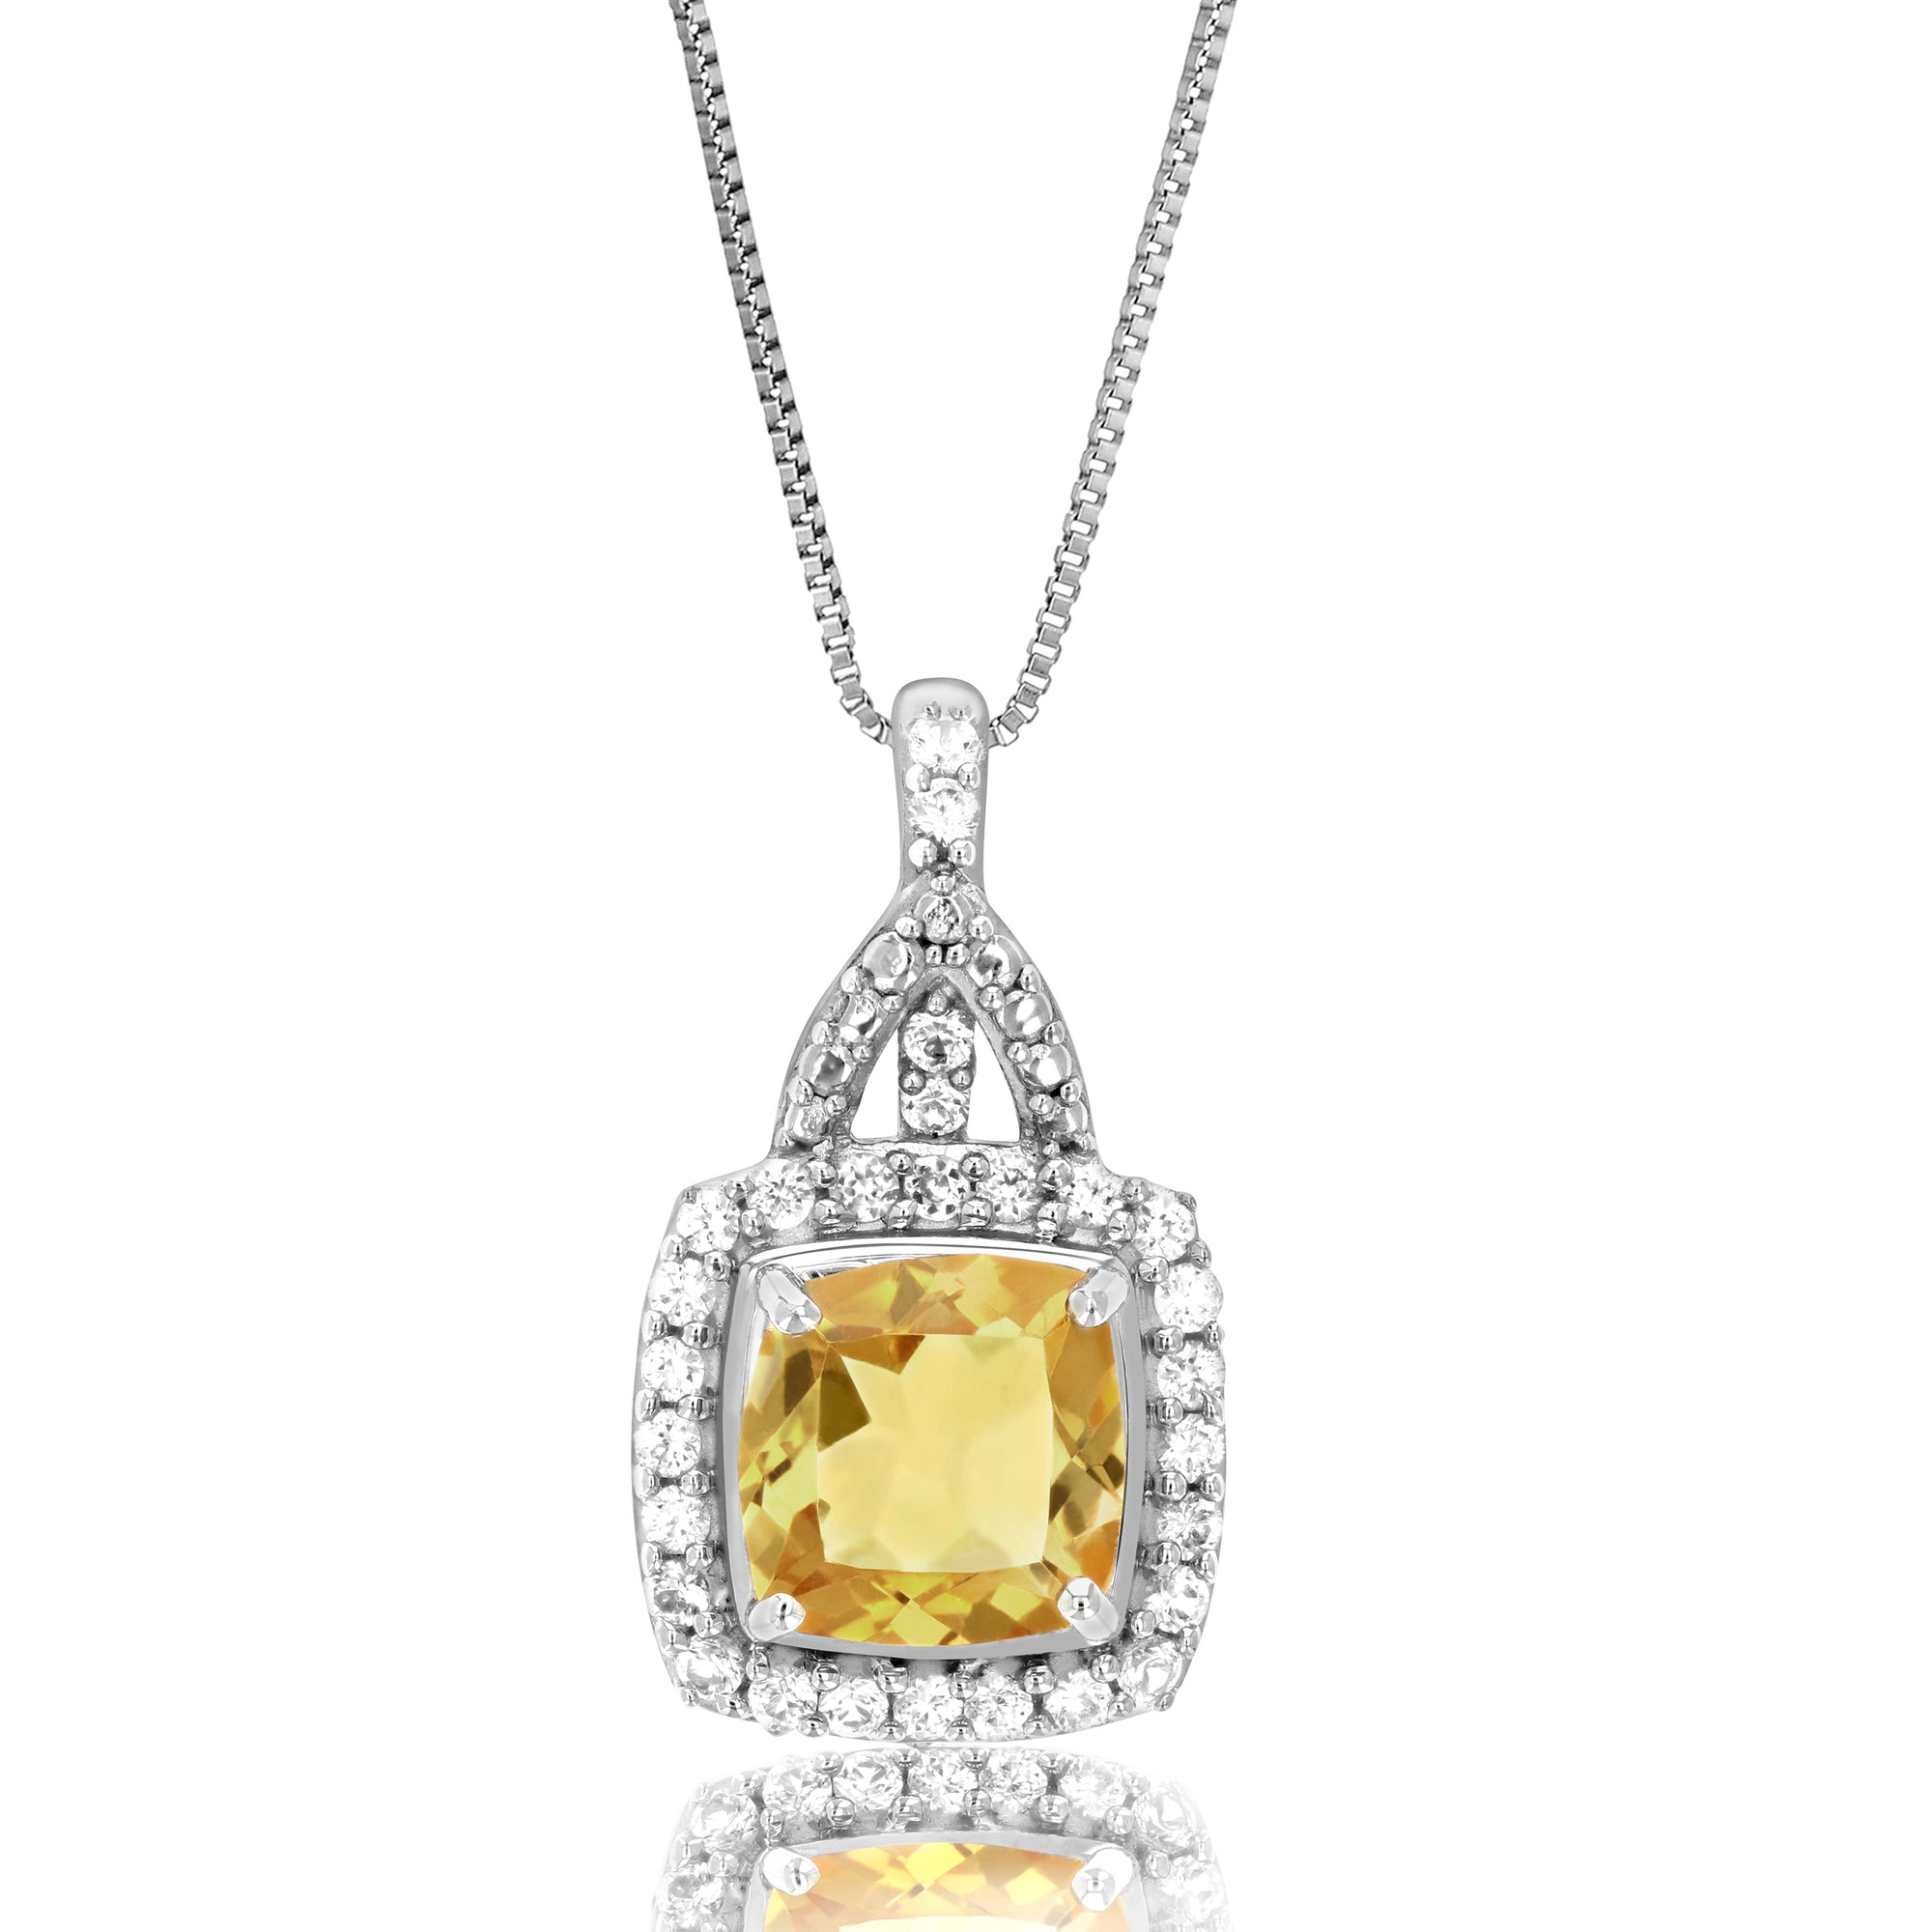 1.50 cttw Cushion Cut Citrine Pendant .925 Sterling Silver with 18 inch Chain